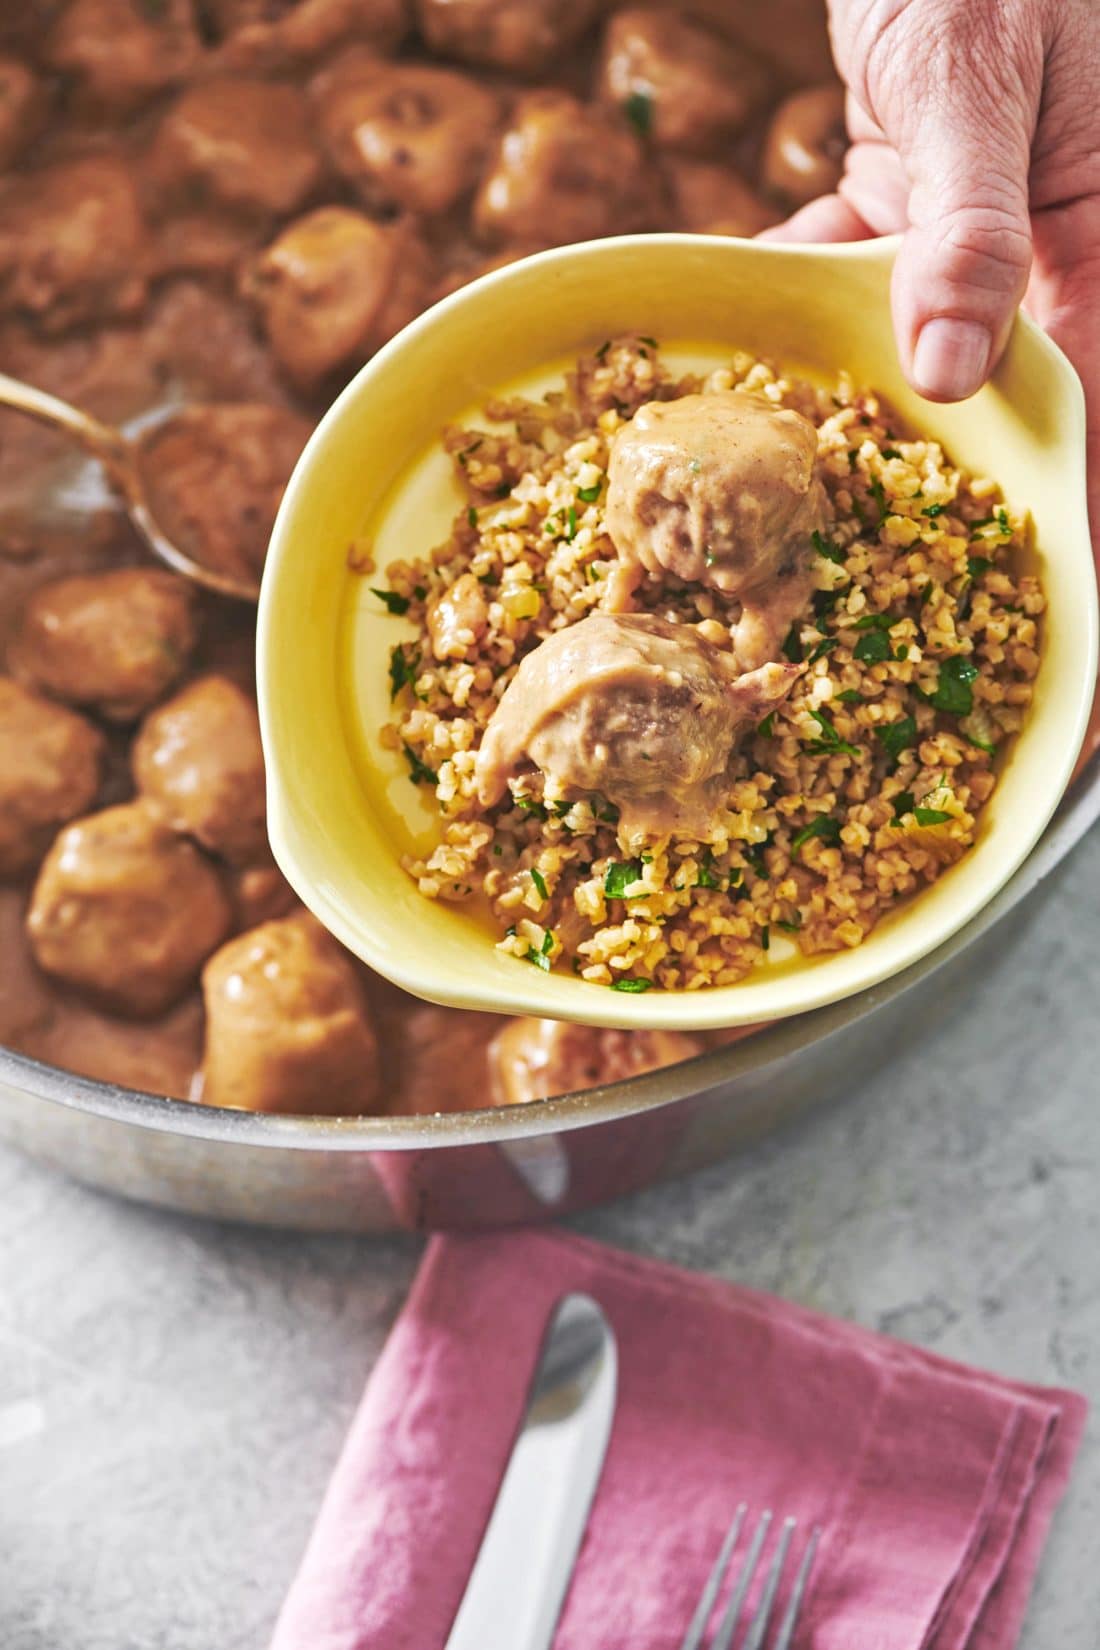 Swedish Meatballs over grains in a yellow bowl.